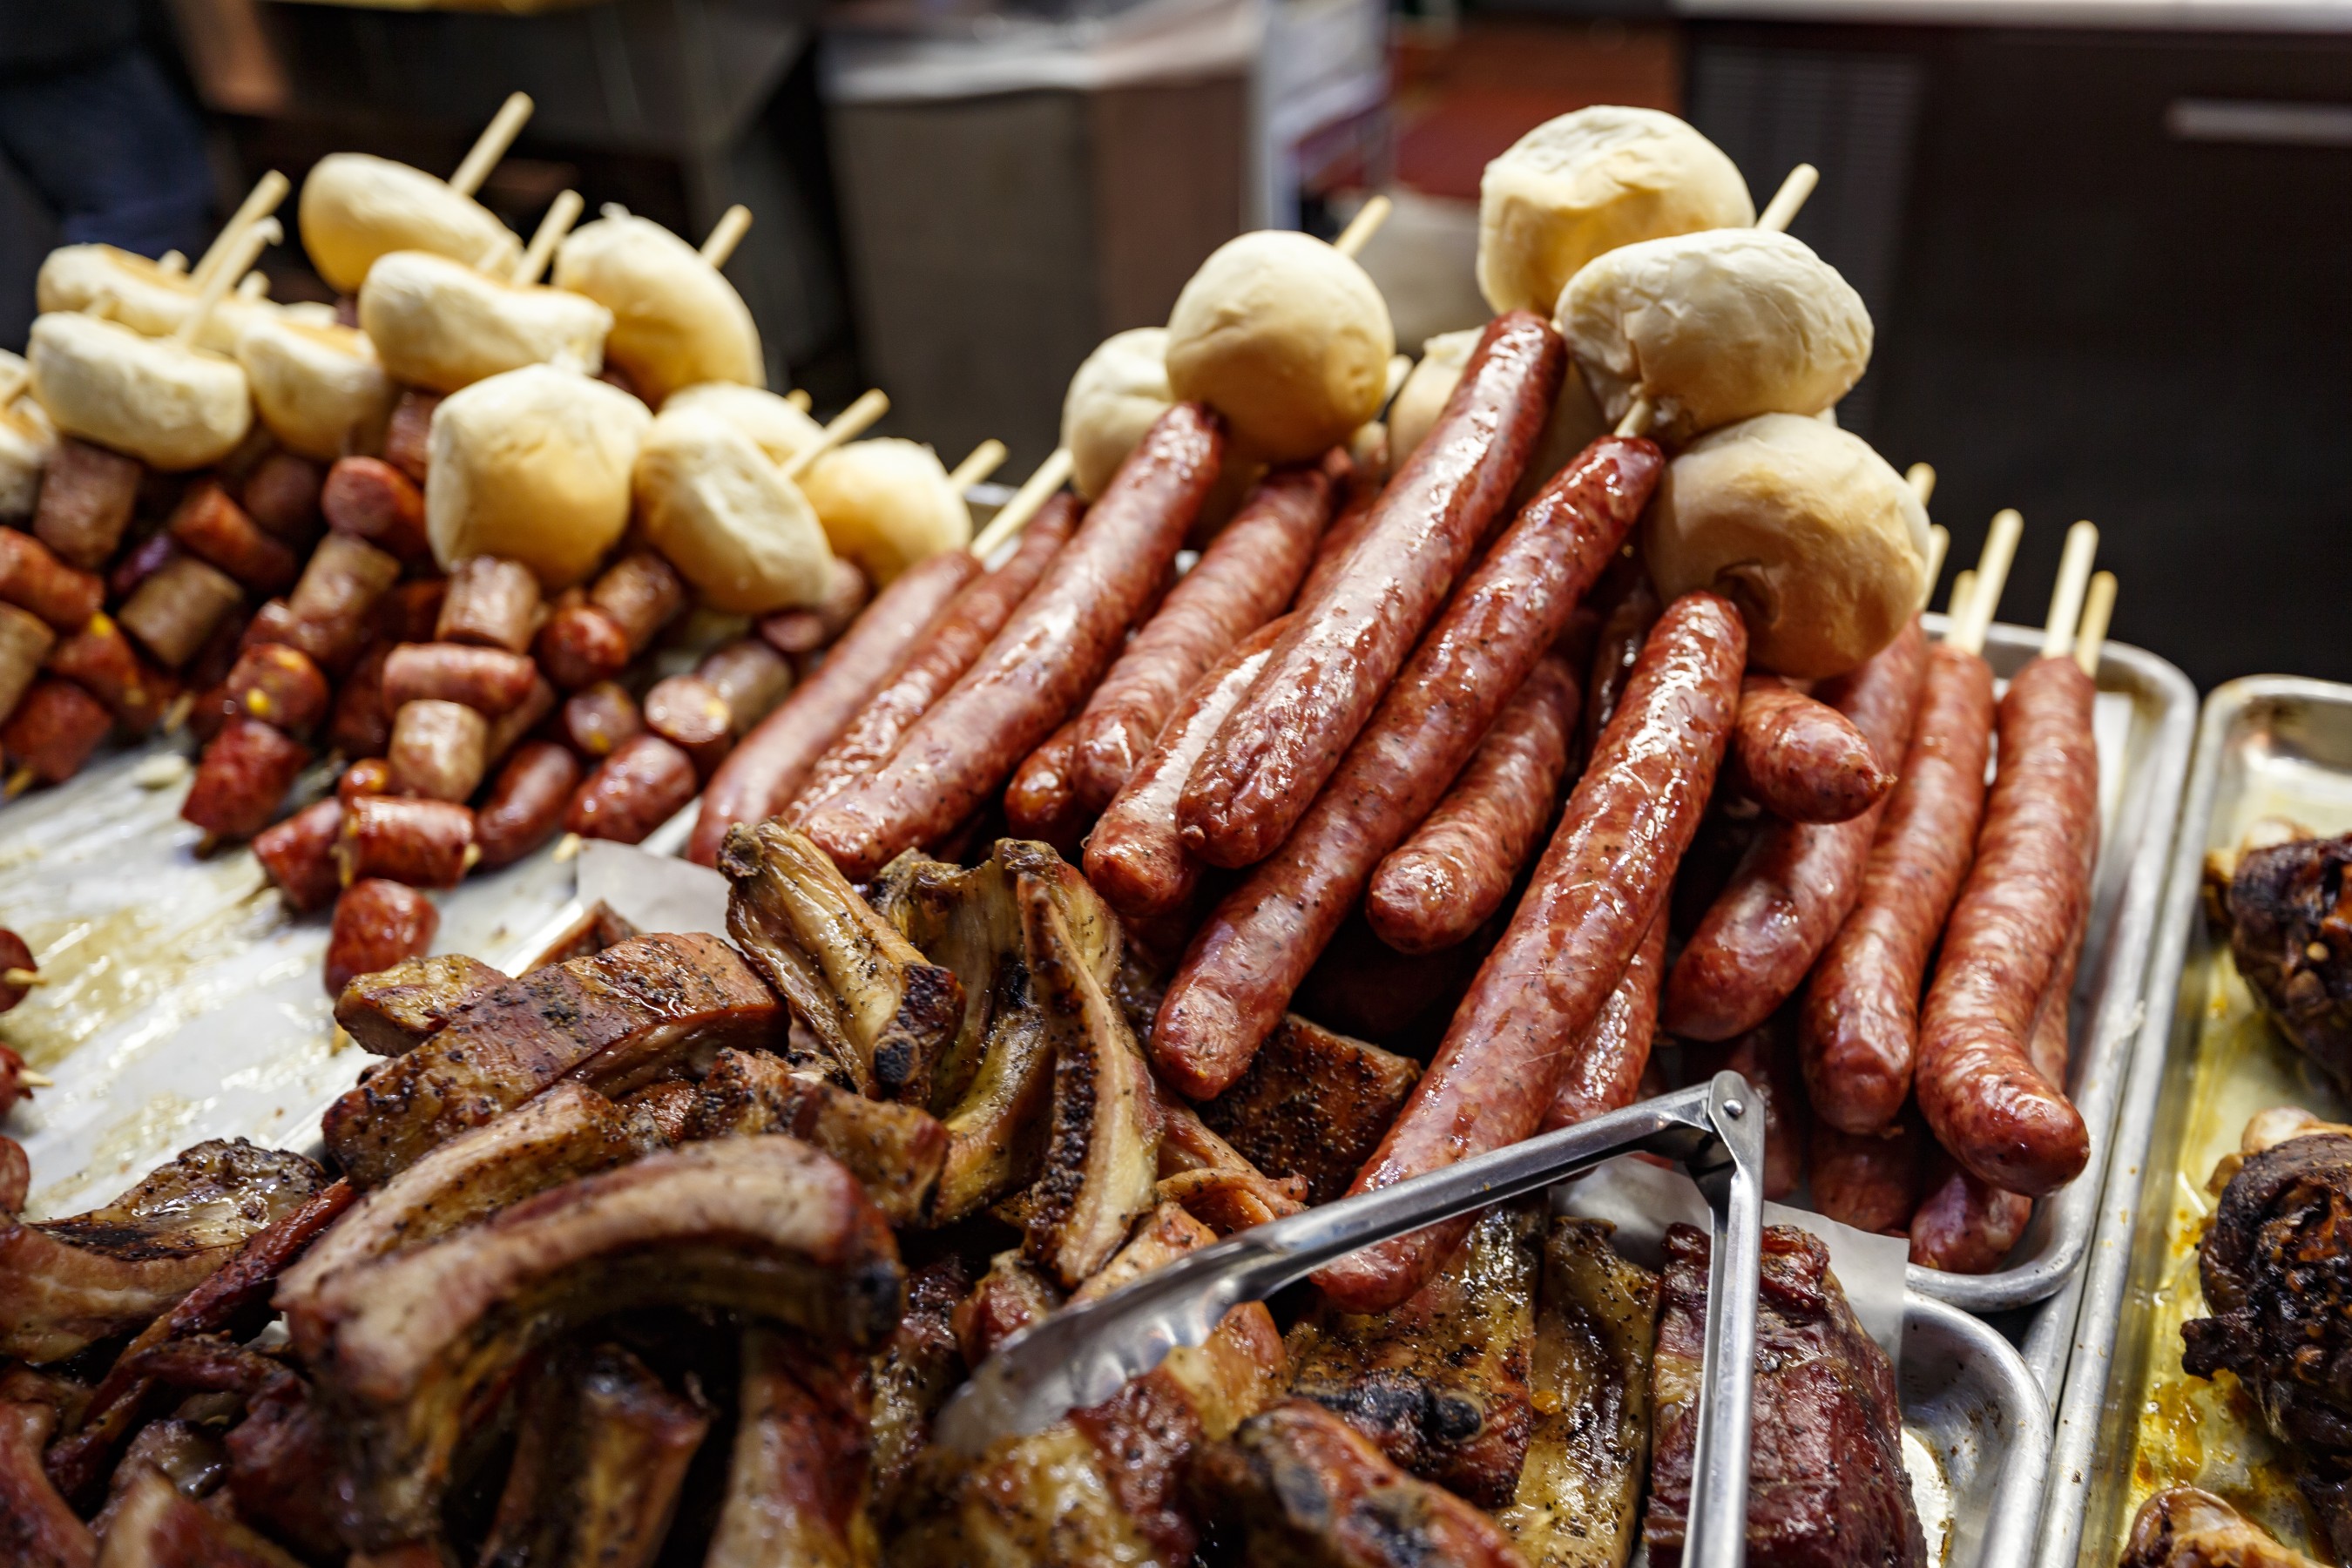 Known for its German-delectable sausage, Wurstfest revelers can try several varieties sold by local non-profit organizations and businesses with family recipes that date back to the late 1800s.